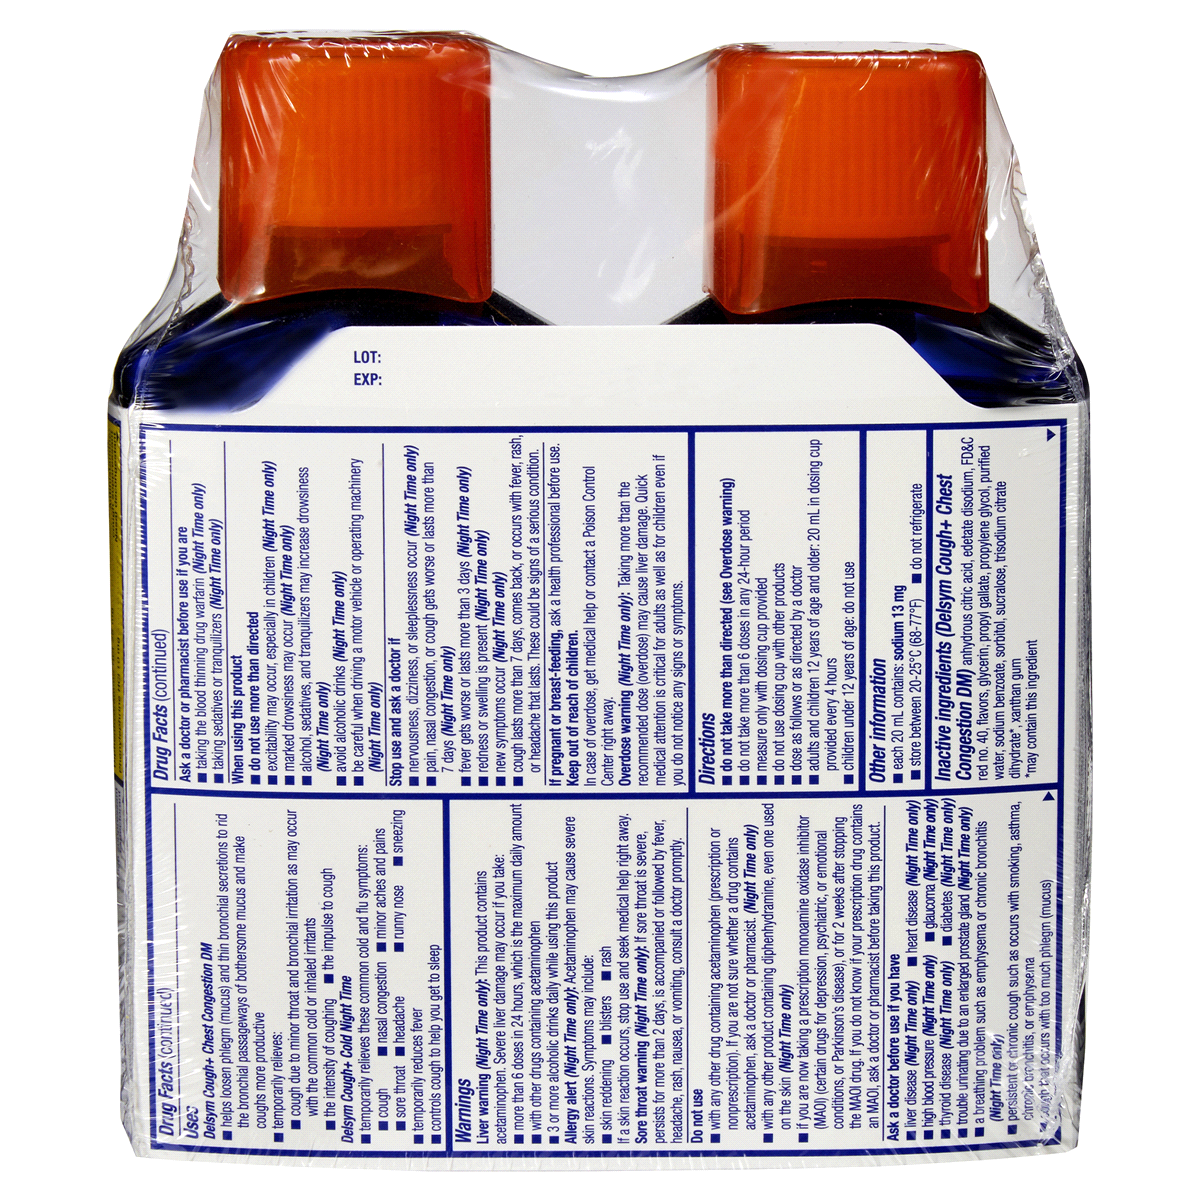 slide 2 of 2, DELSYM Adult Liquid - Day Night Cough Plus Chest Congestion DM Cough and Coldofbottles, 2 ct